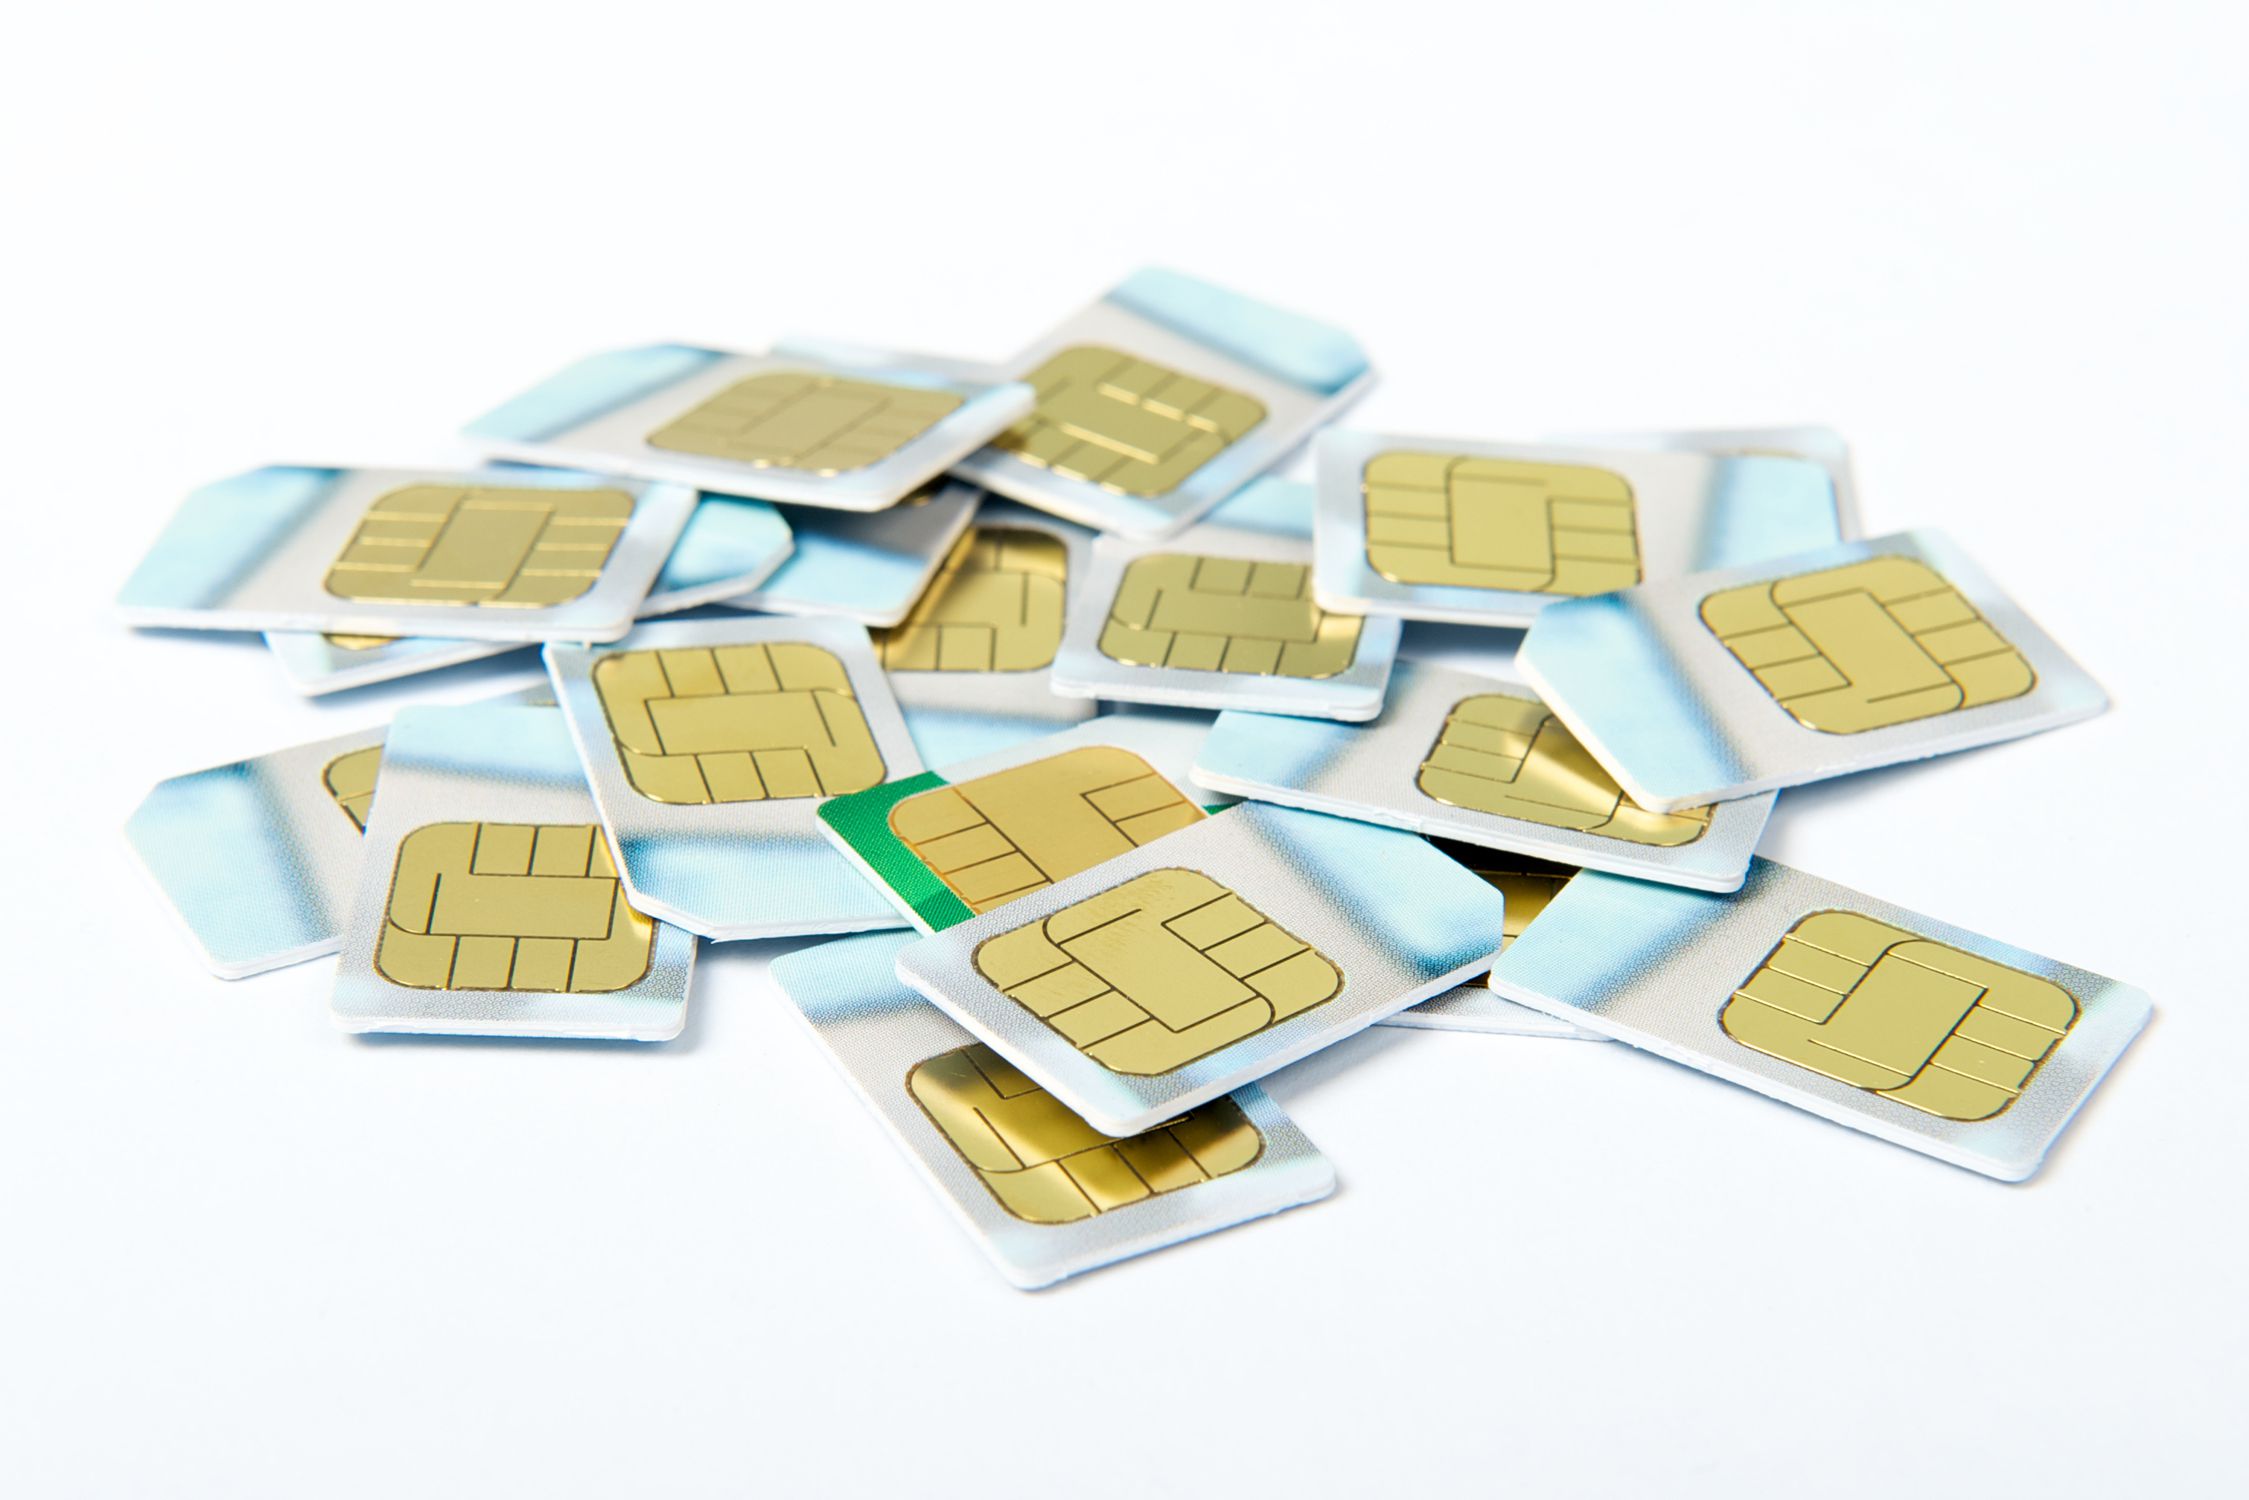 IoT sim cards that connect to any network in Northern Ireland